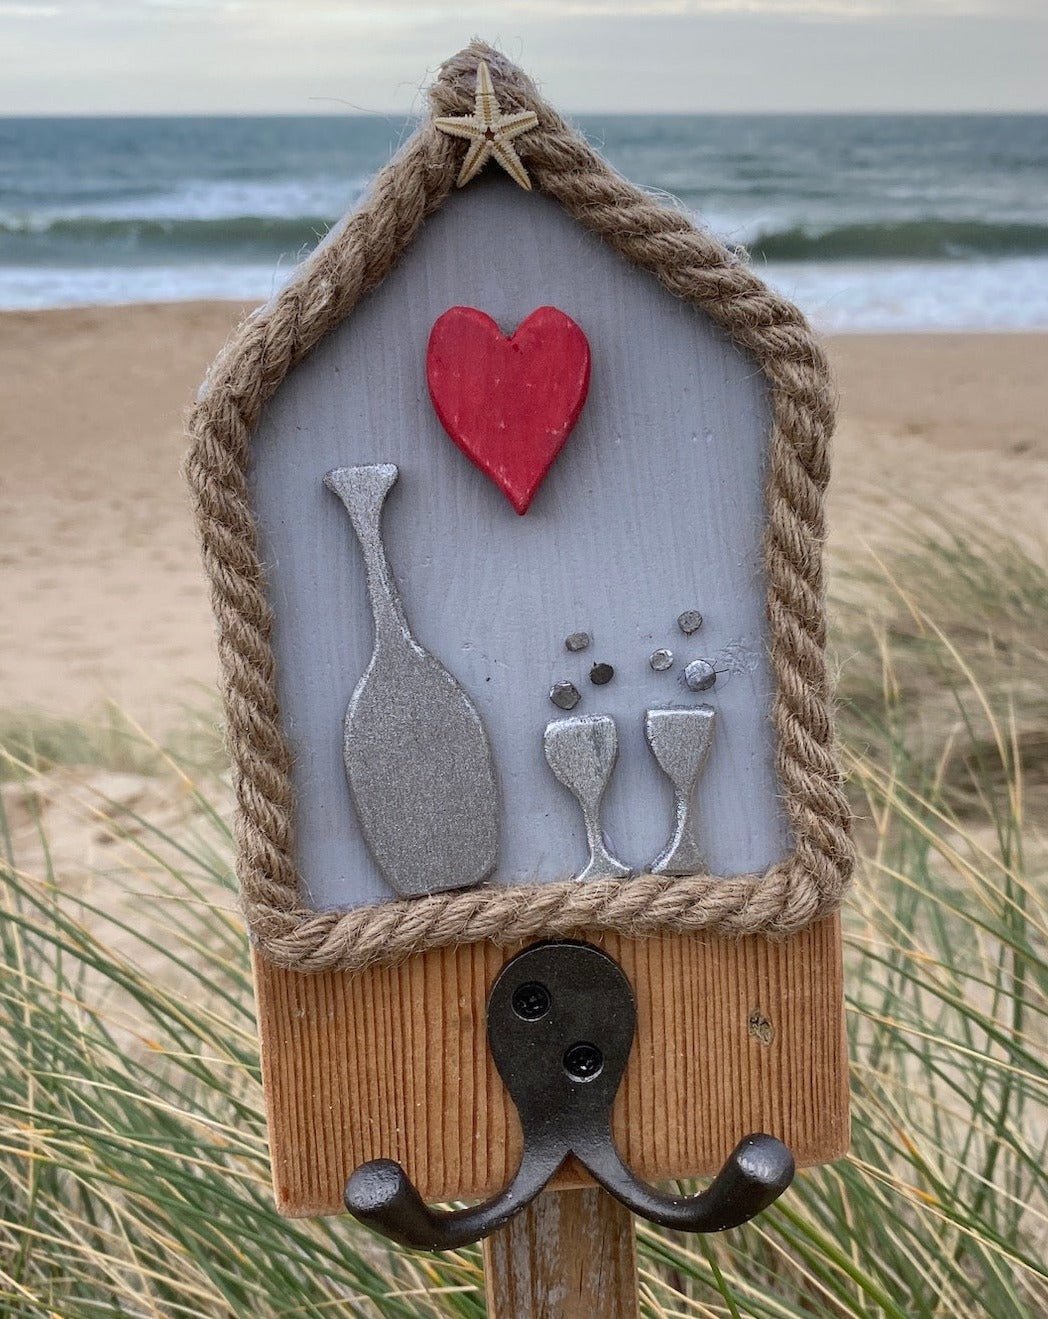 Rustic Hooks with Prosecco detail - Drift Craft by Jo